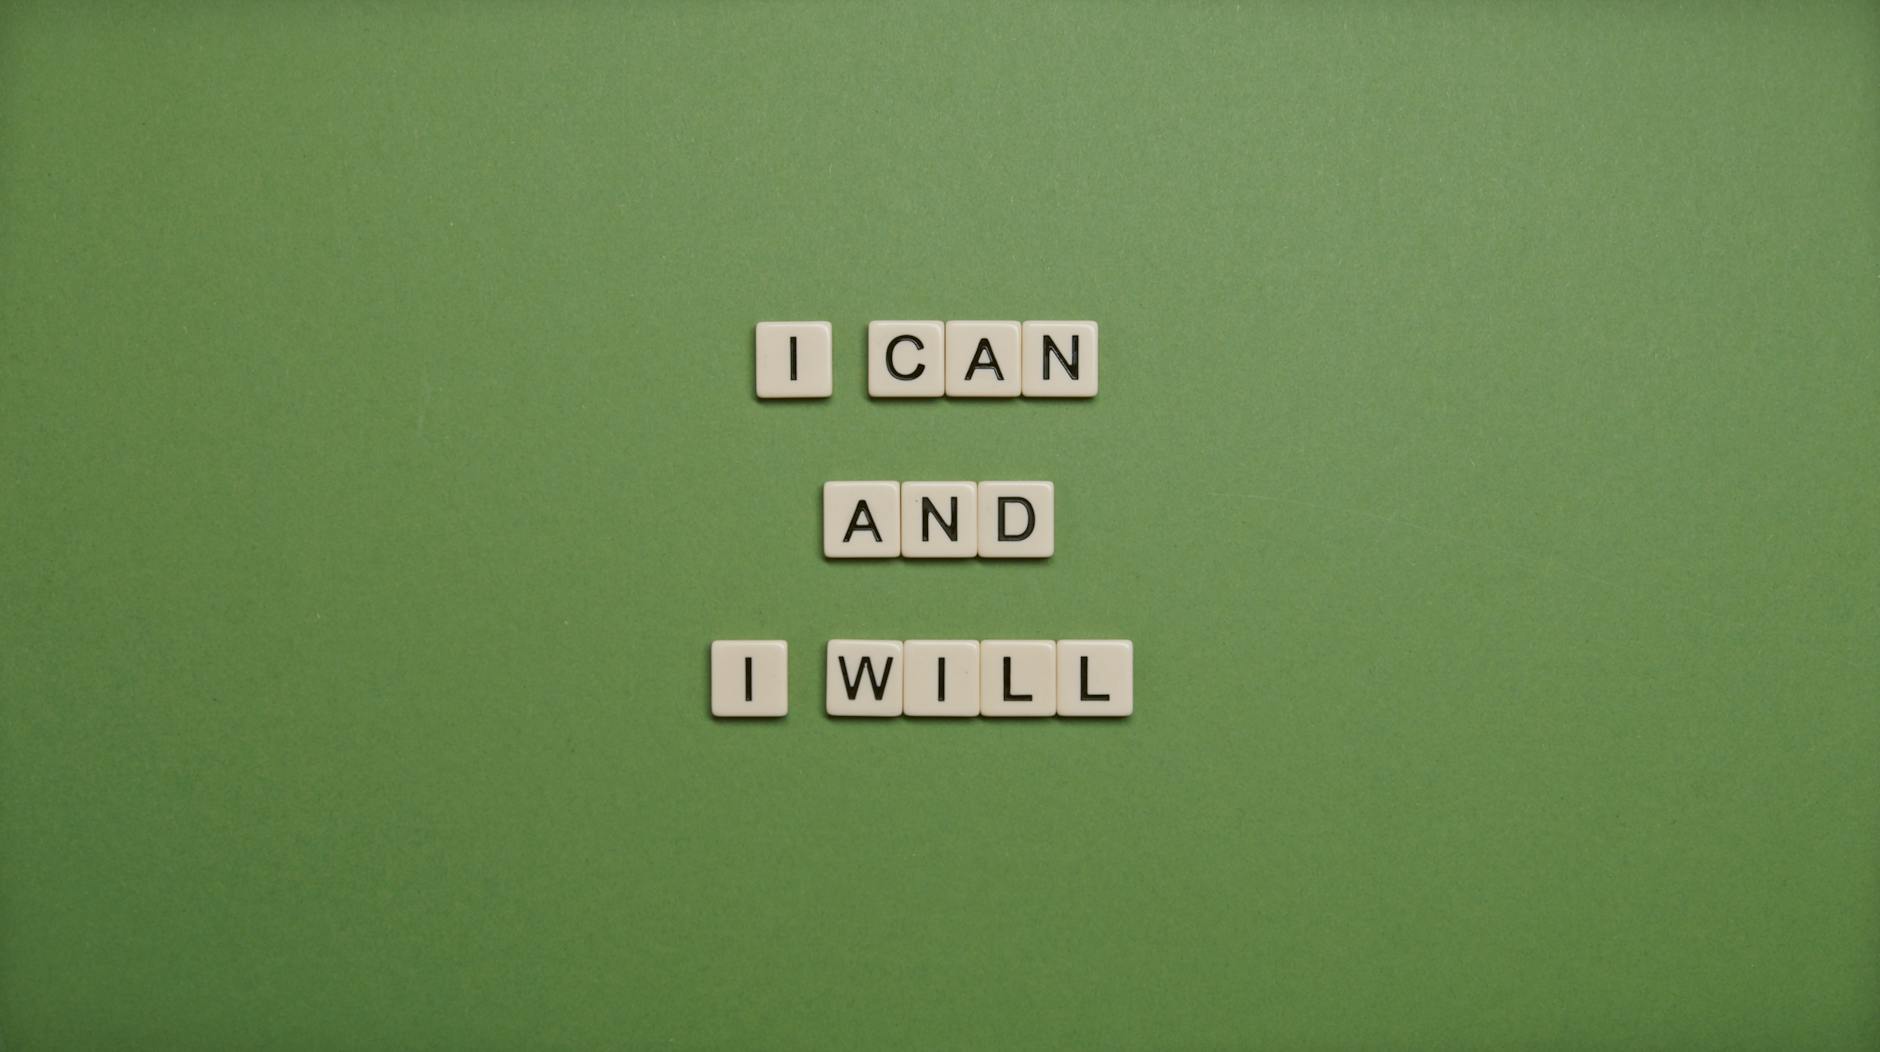 i can and i will text on green background